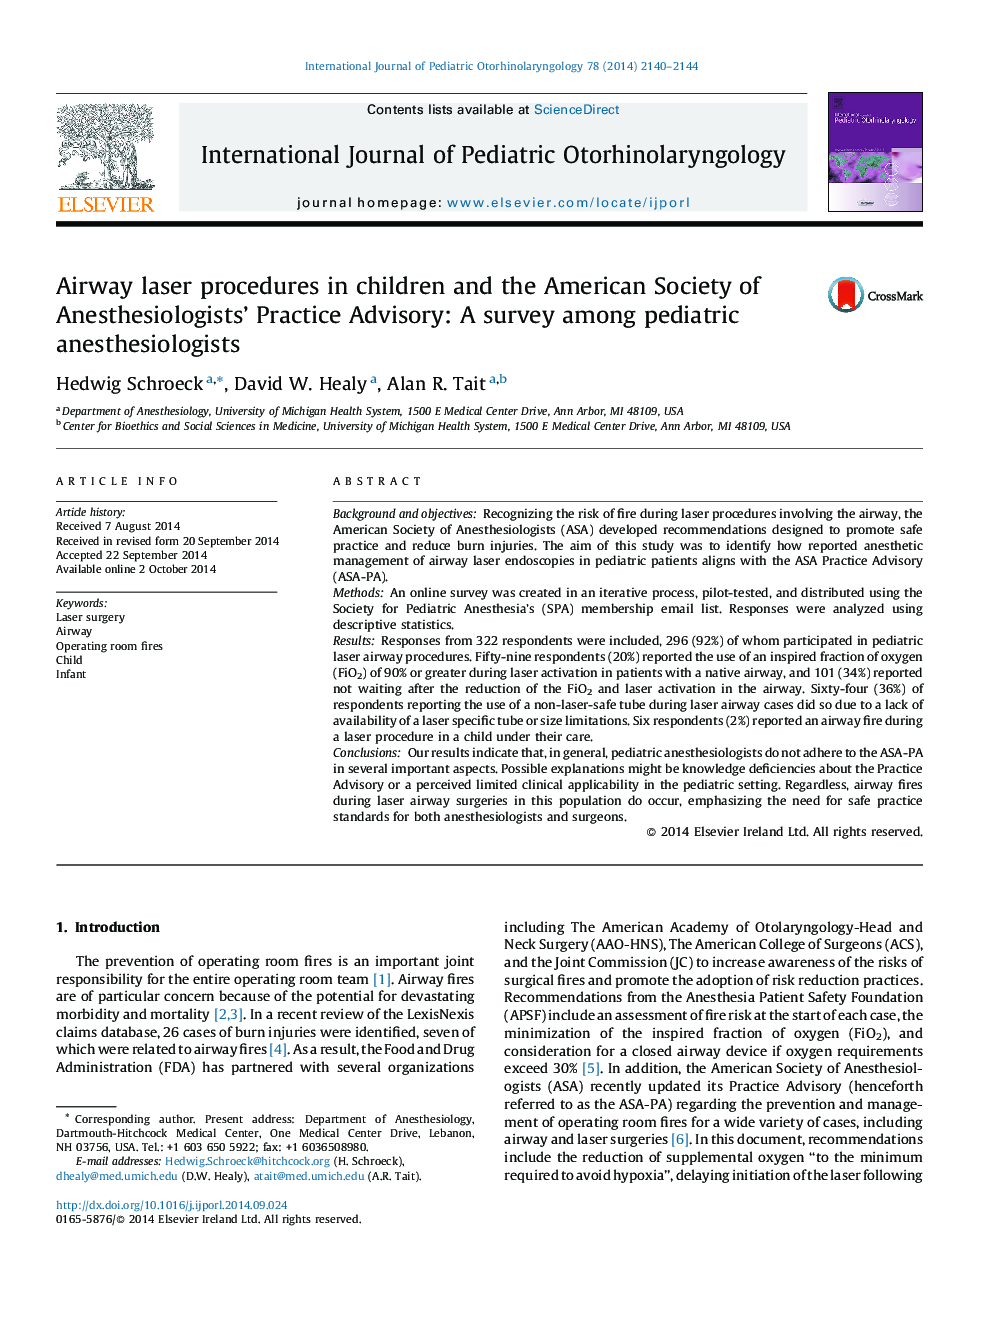 Airway laser procedures in children and the American Society of Anesthesiologists’ Practice Advisory: A survey among pediatric anesthesiologists